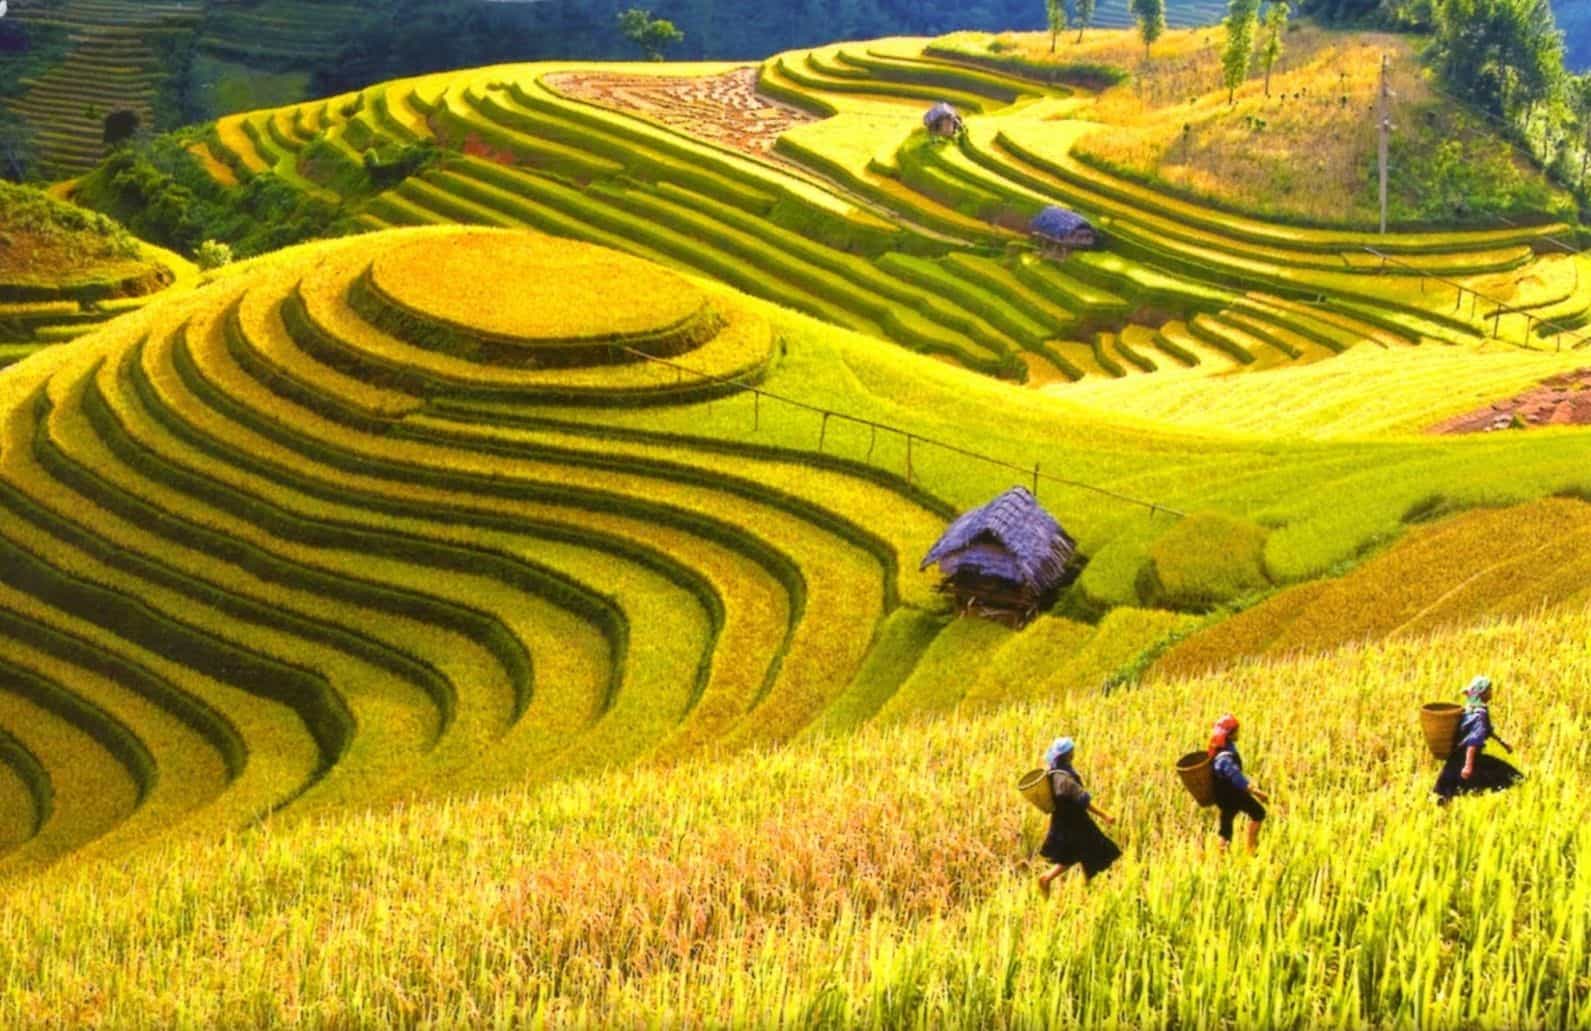 Top 10 Experiences You Can't Miss in Sapa